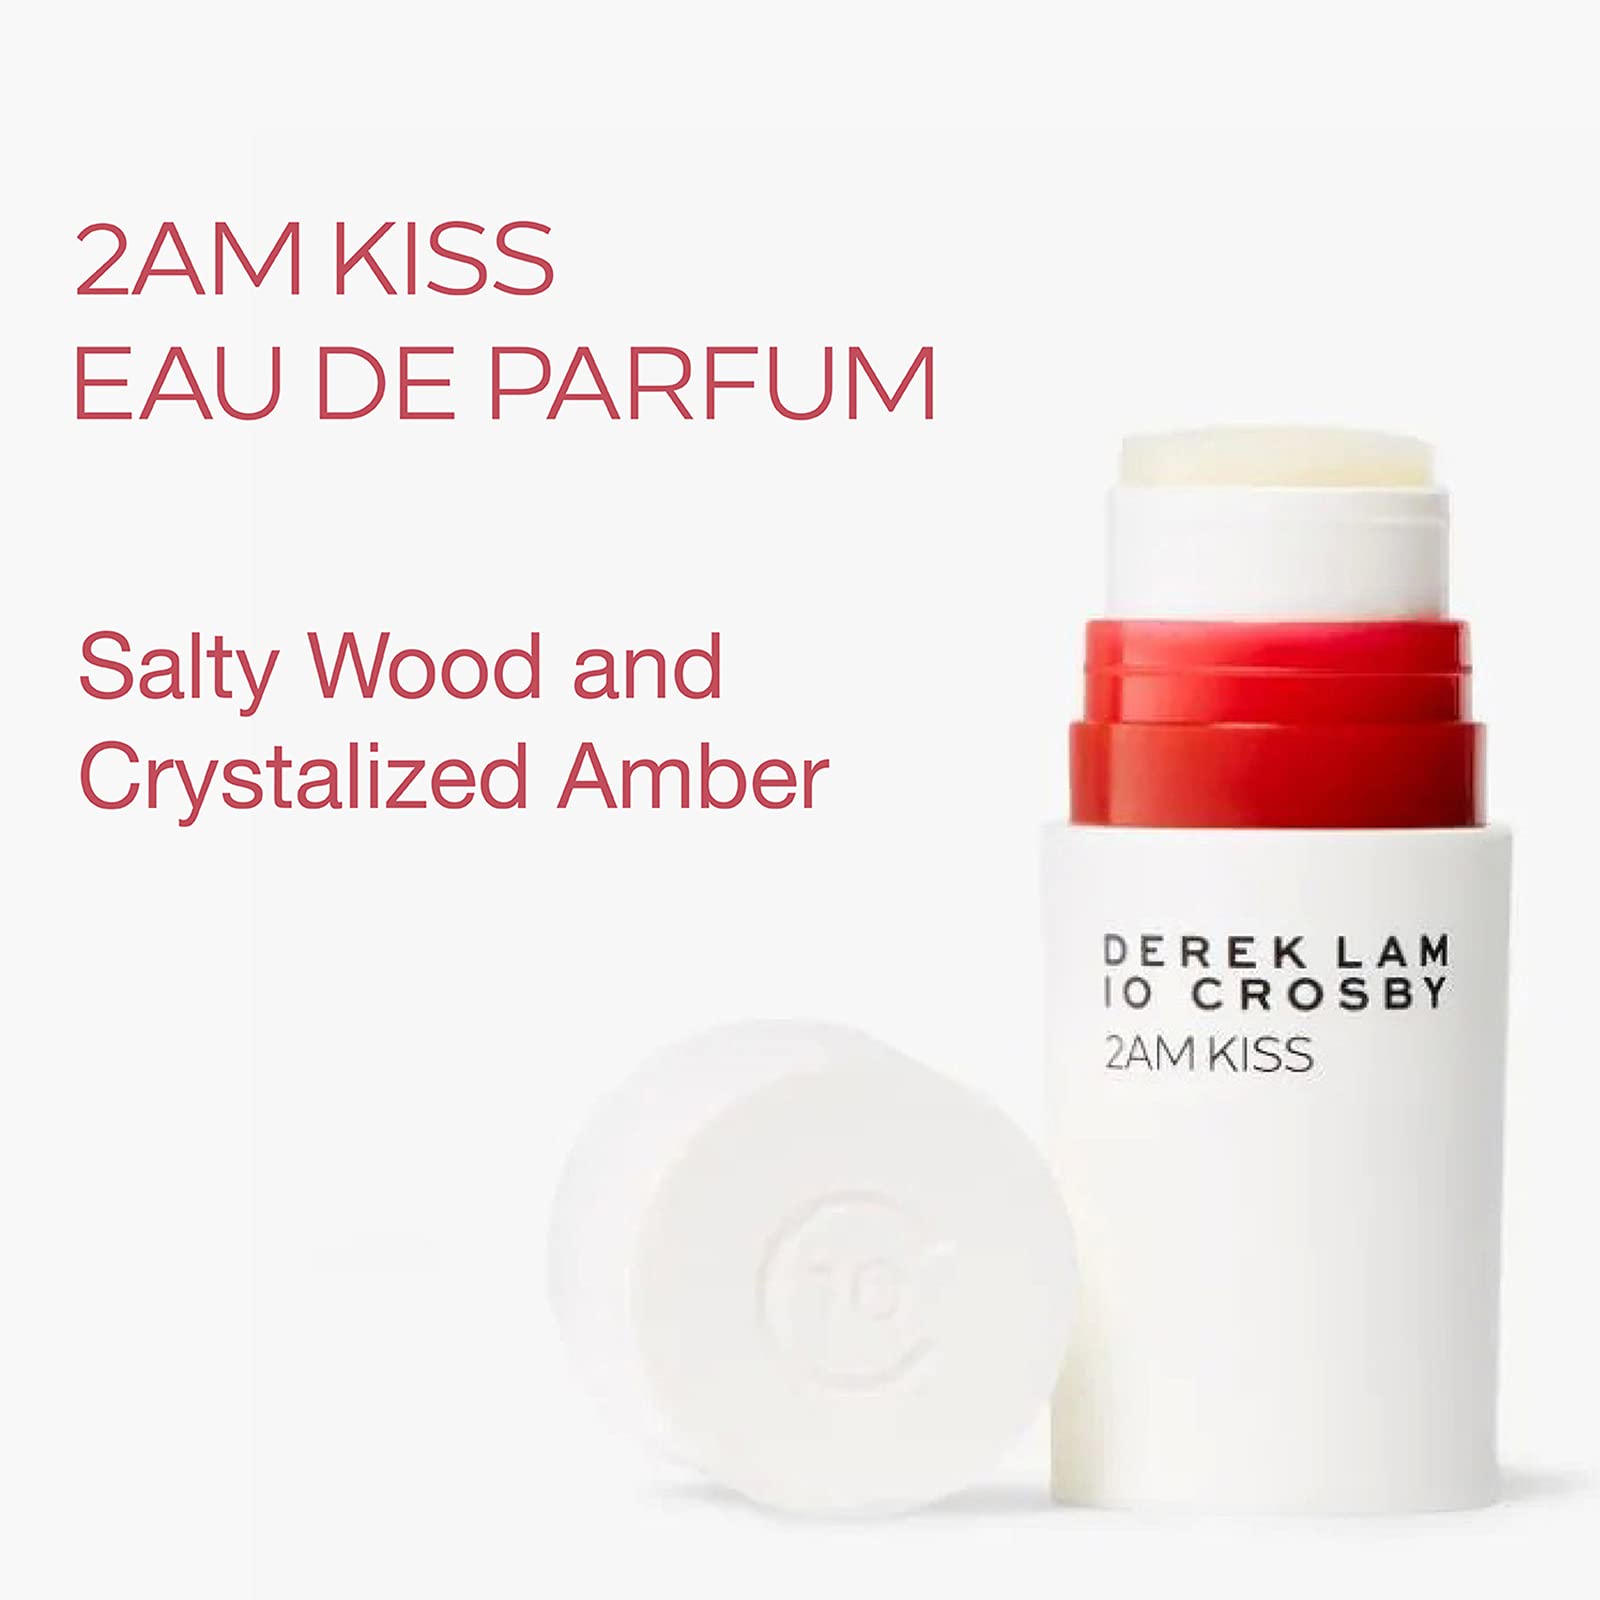 Derek Lam 10 Crosby - 2AM Kiss - 0.12 Oz Eau De Parfum - Solid Stick Perfume For Women - Amber And Woody Scent - Sweet Fig, Spicy Cinnamon, And Warm Caramel Fragrance (7495286161646)